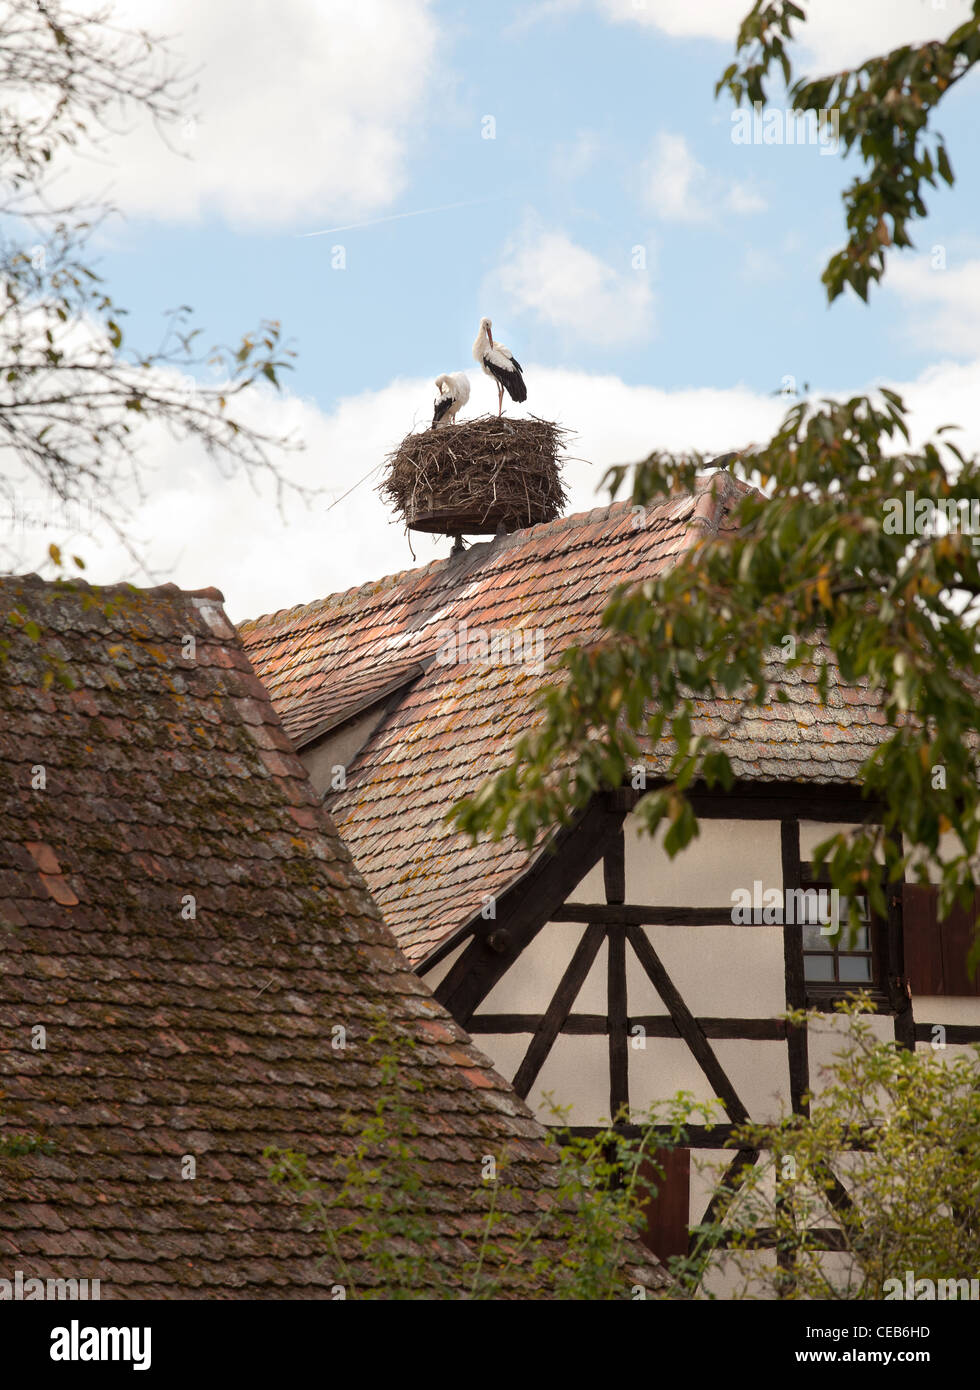 Half timber framed traditional buildings in Ungersheim eco museum, Alsace, France Stock Photo